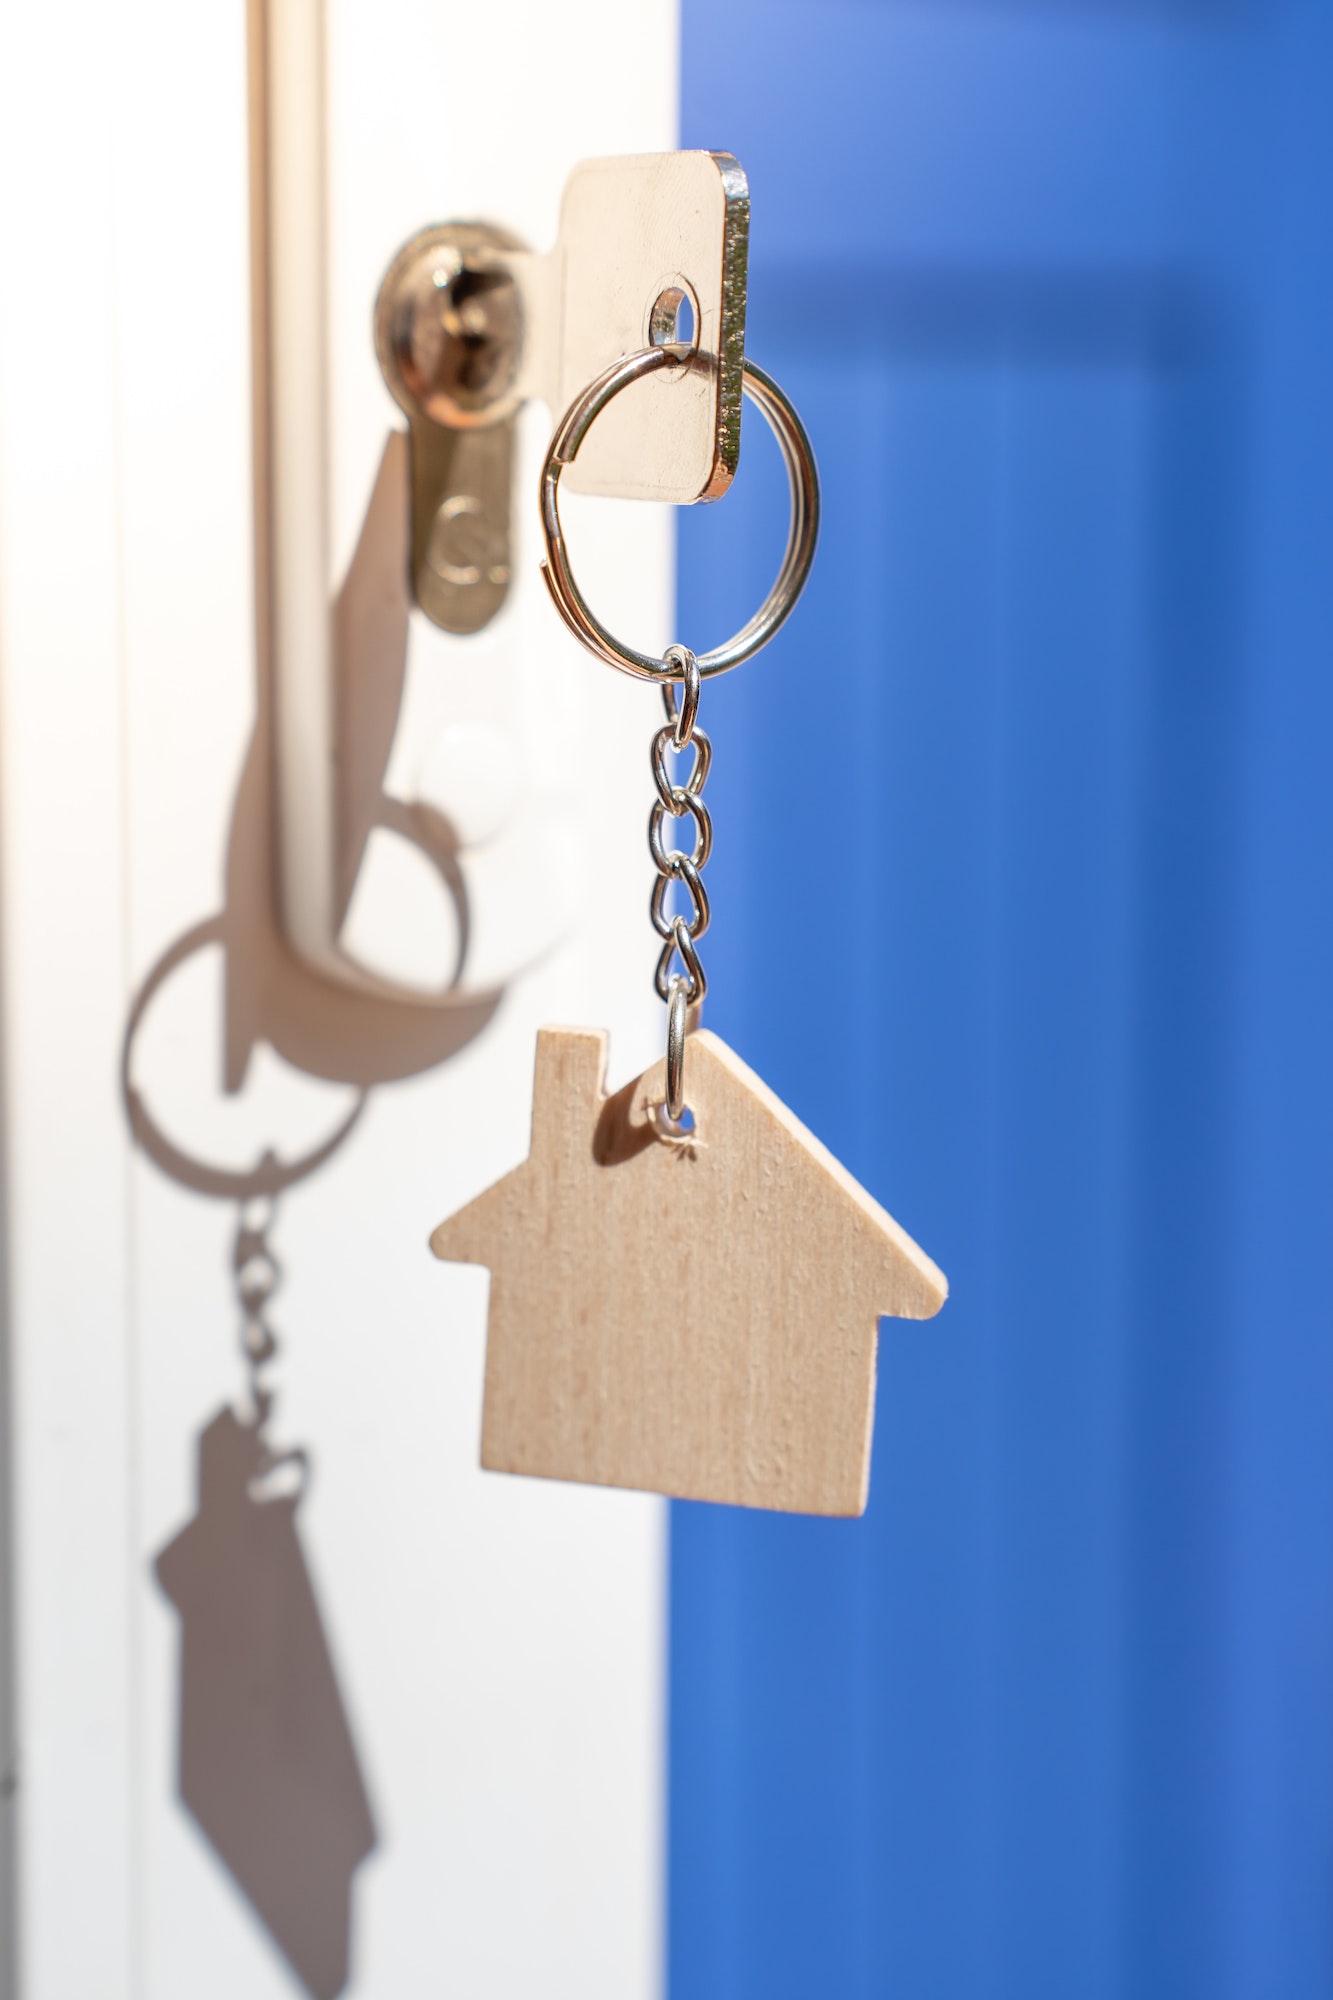 Opening door to a new home with key and home shaped keychain. Property and new home concept